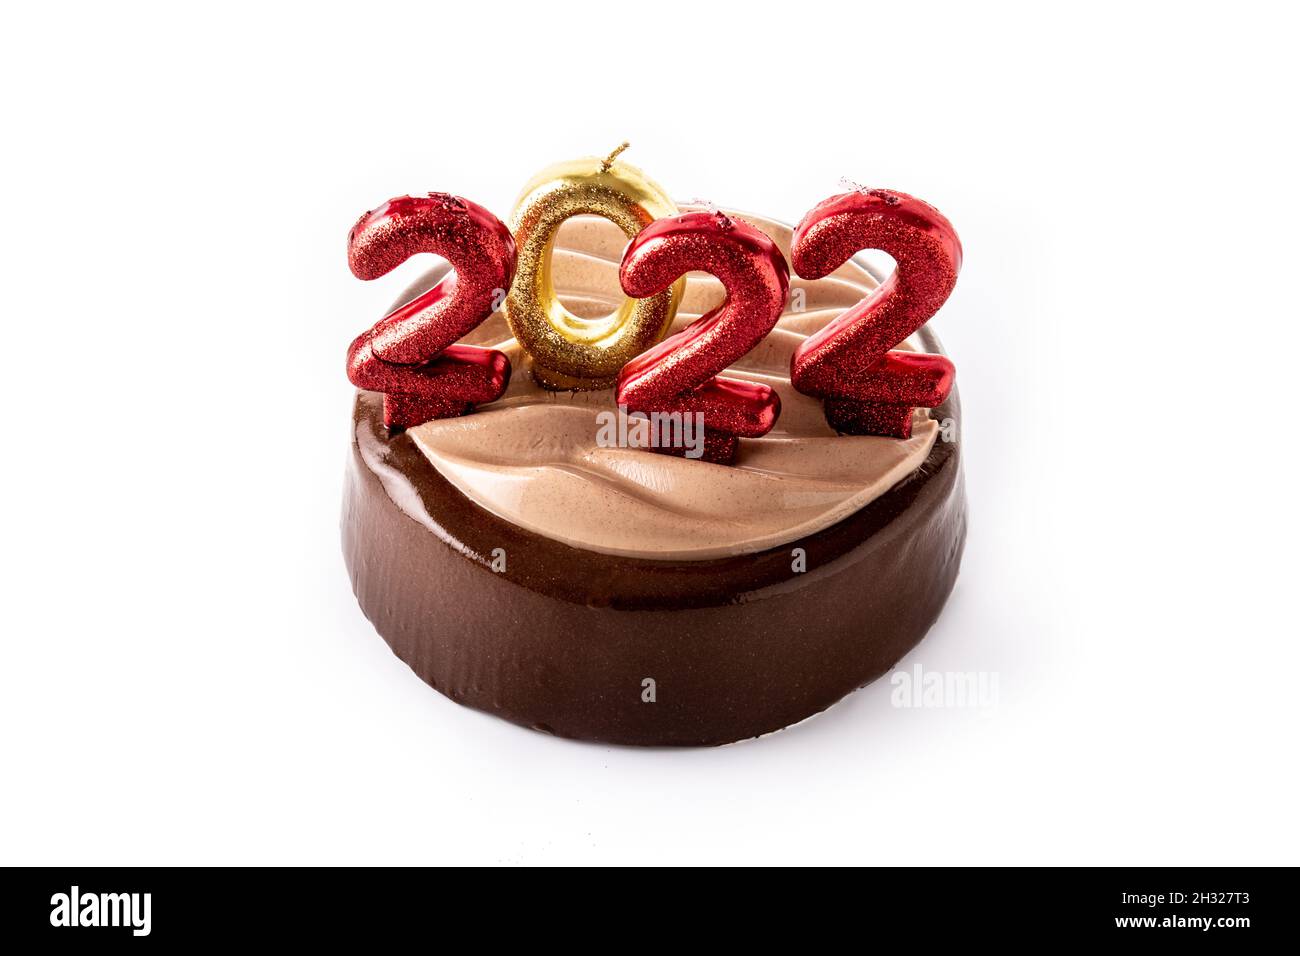 Discover 171+ new year cake wallpaper super hot